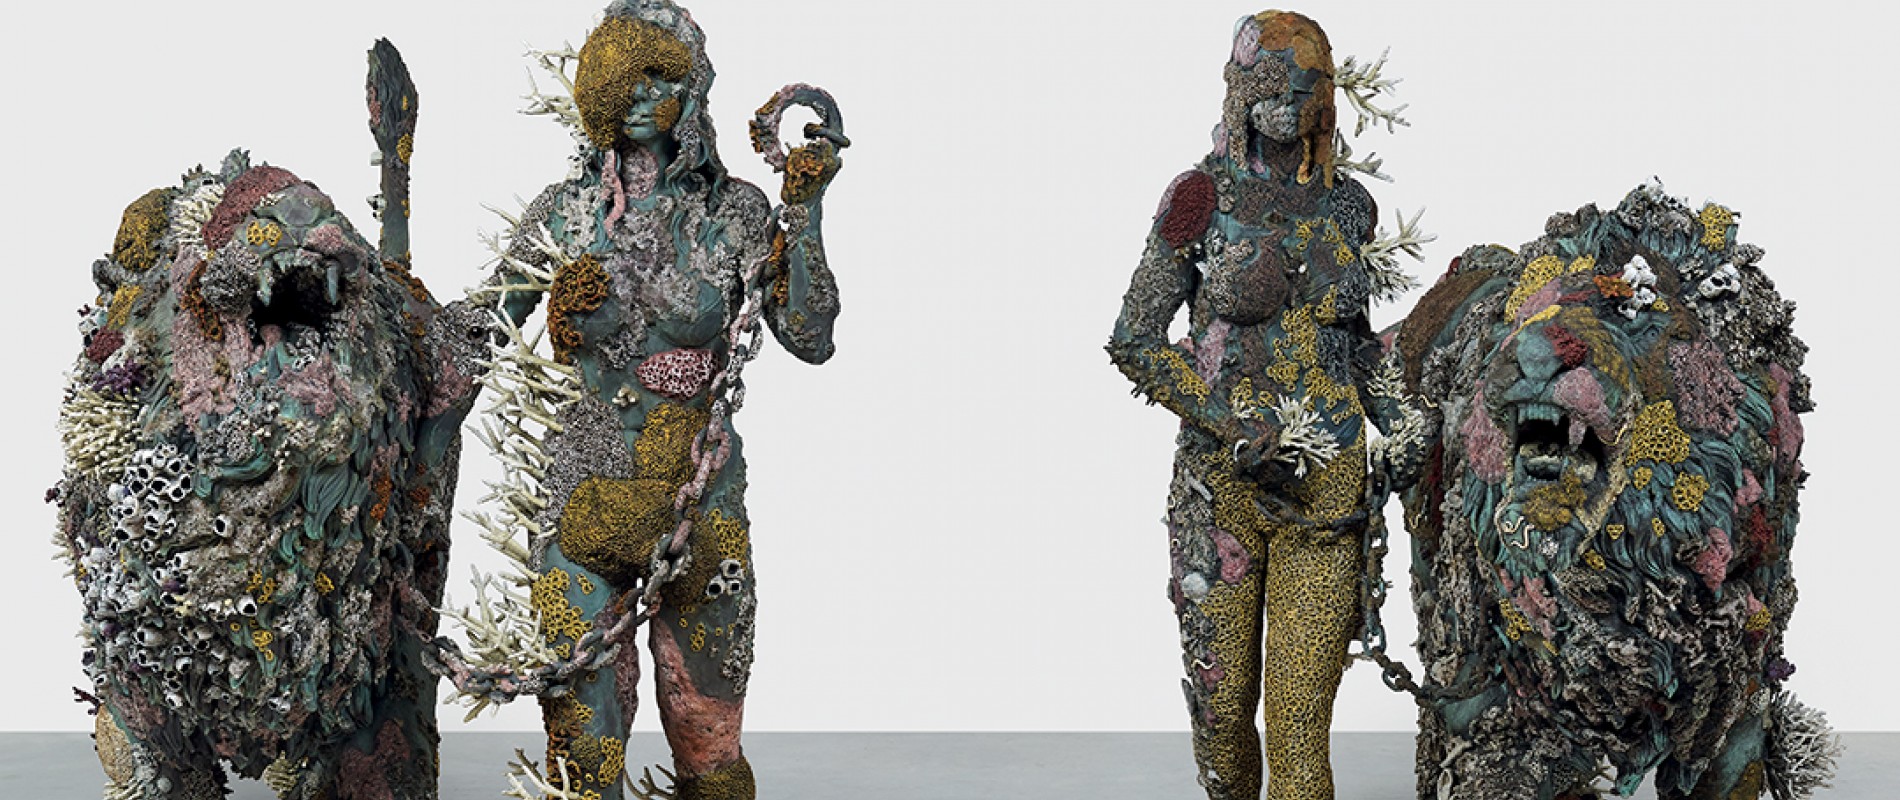 DAMIEN HIRST Lion Women of Asit Mayor, 2012  Edition of 3 with 2 artist's proofs Collezione Prada, Milano  Ph: Prudence Cuming Associates Ltd  © Damien Hirst and Science Ltd. All rights reserved, DACS 2021 / SIAE 2021